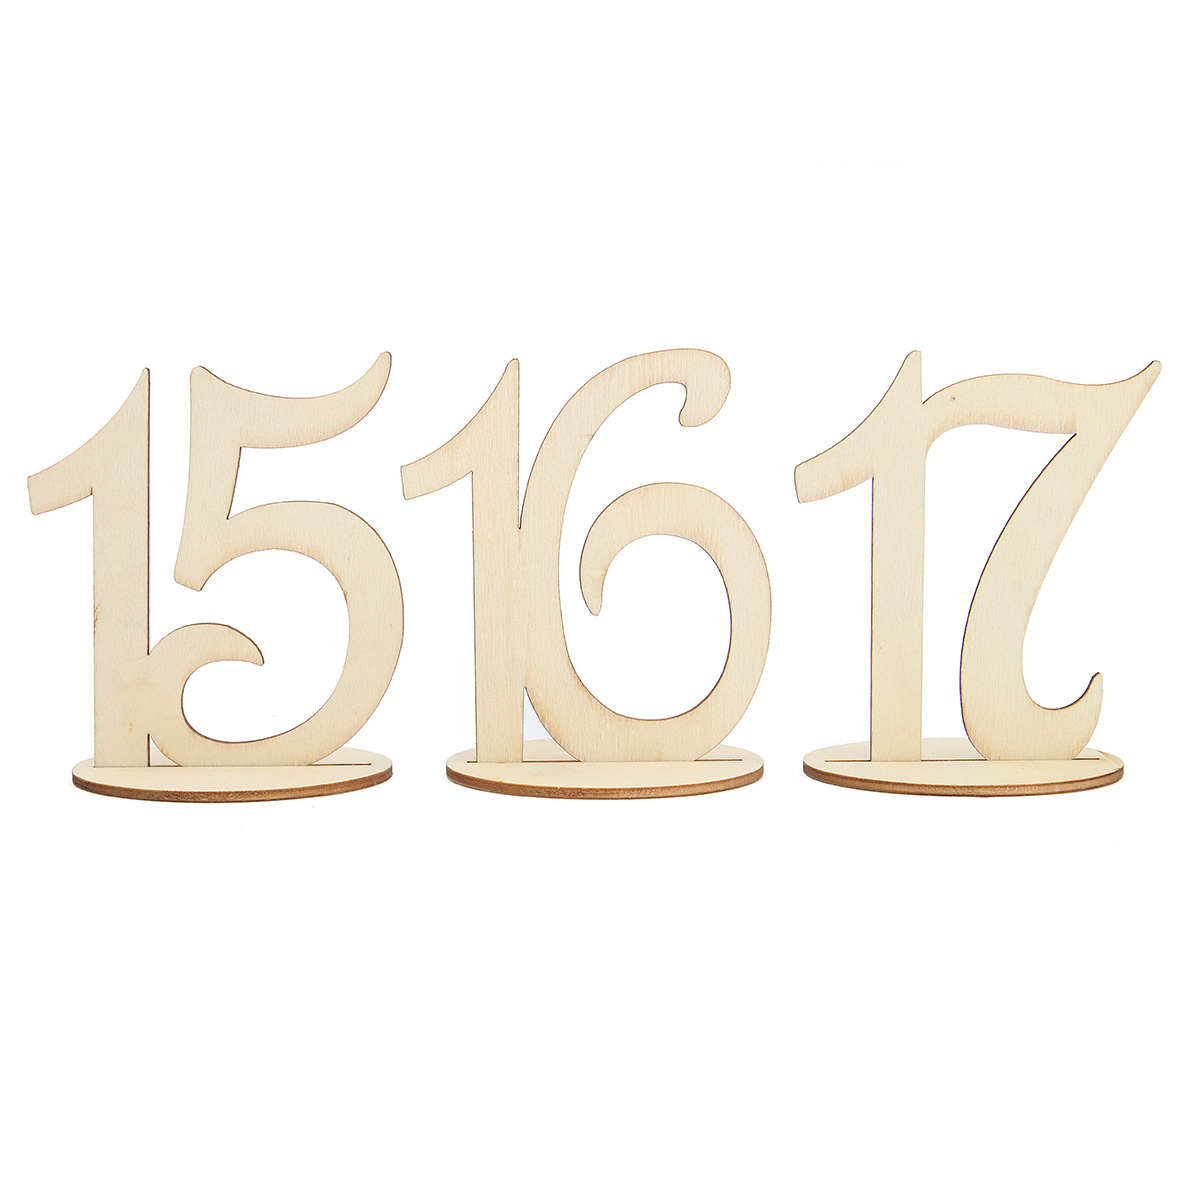 10-Pieces-Number-11-to-20-Place-Wooden-Card-Wedding-Birthday-Party-Table-Decoration-1071044